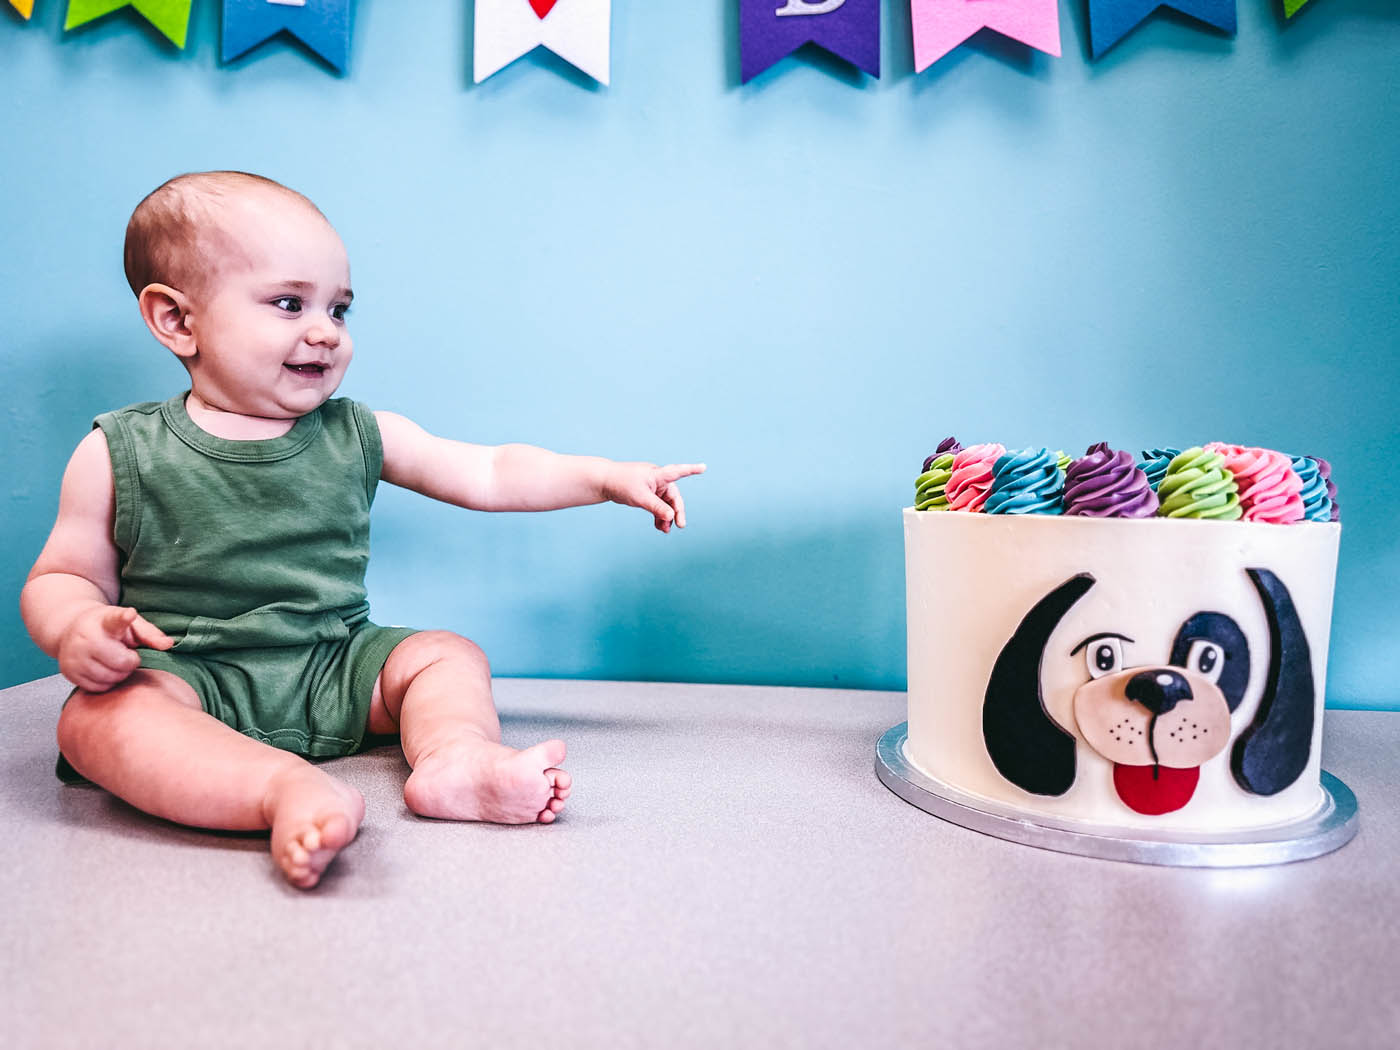 A little baby boy sitting next to a Rompy cake, book a birthday party in Pittsburgh, PA!